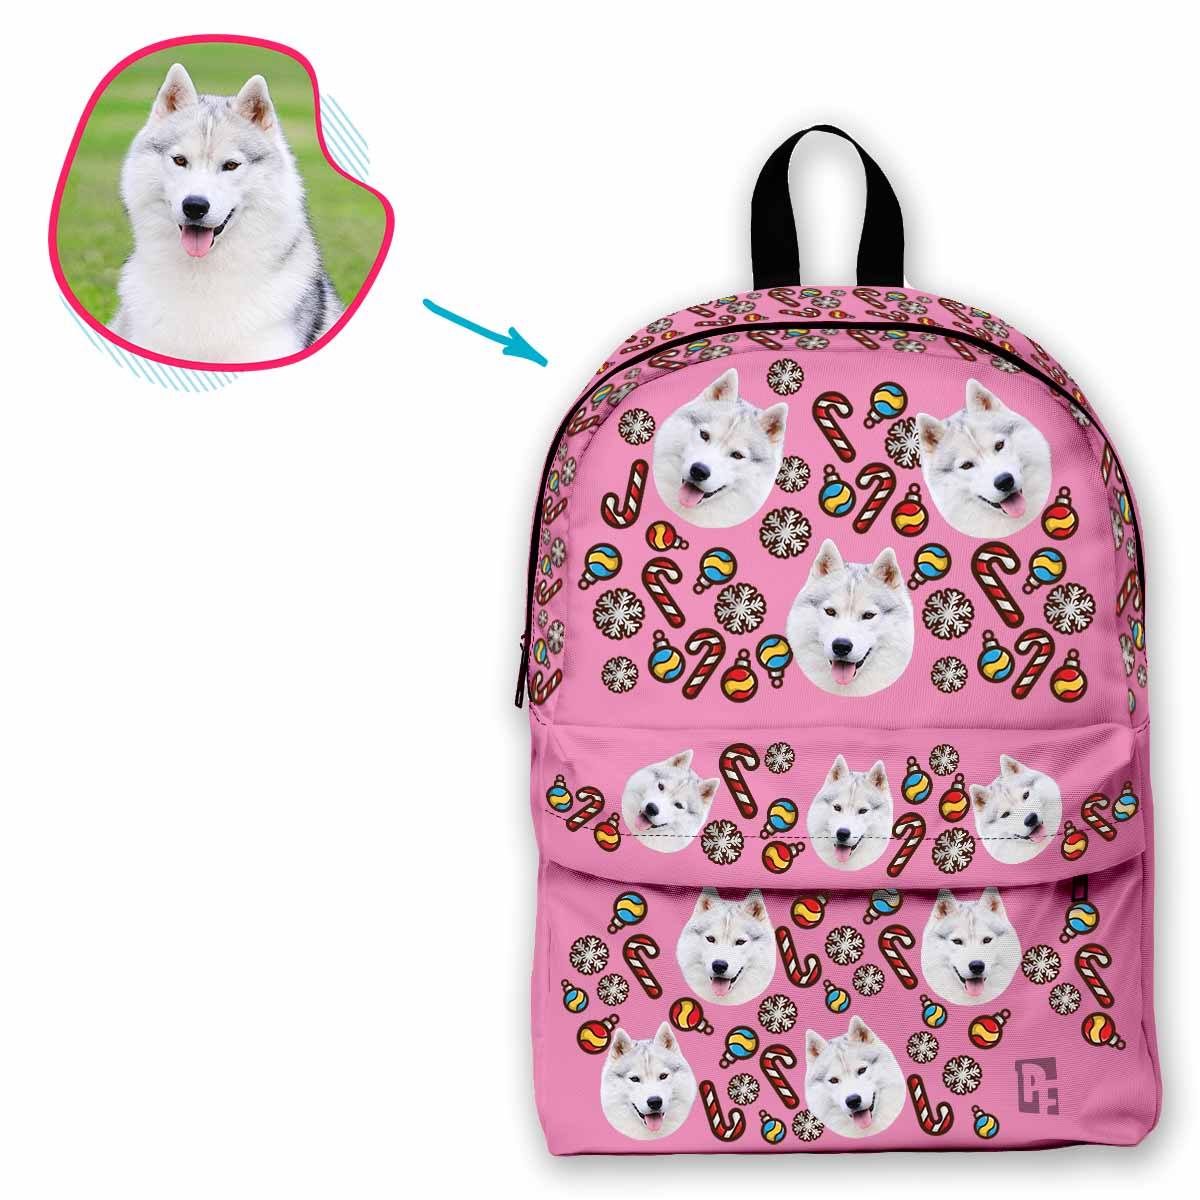 pink Christmas Tree Toy classic backpack personalized with photo of face printed on it